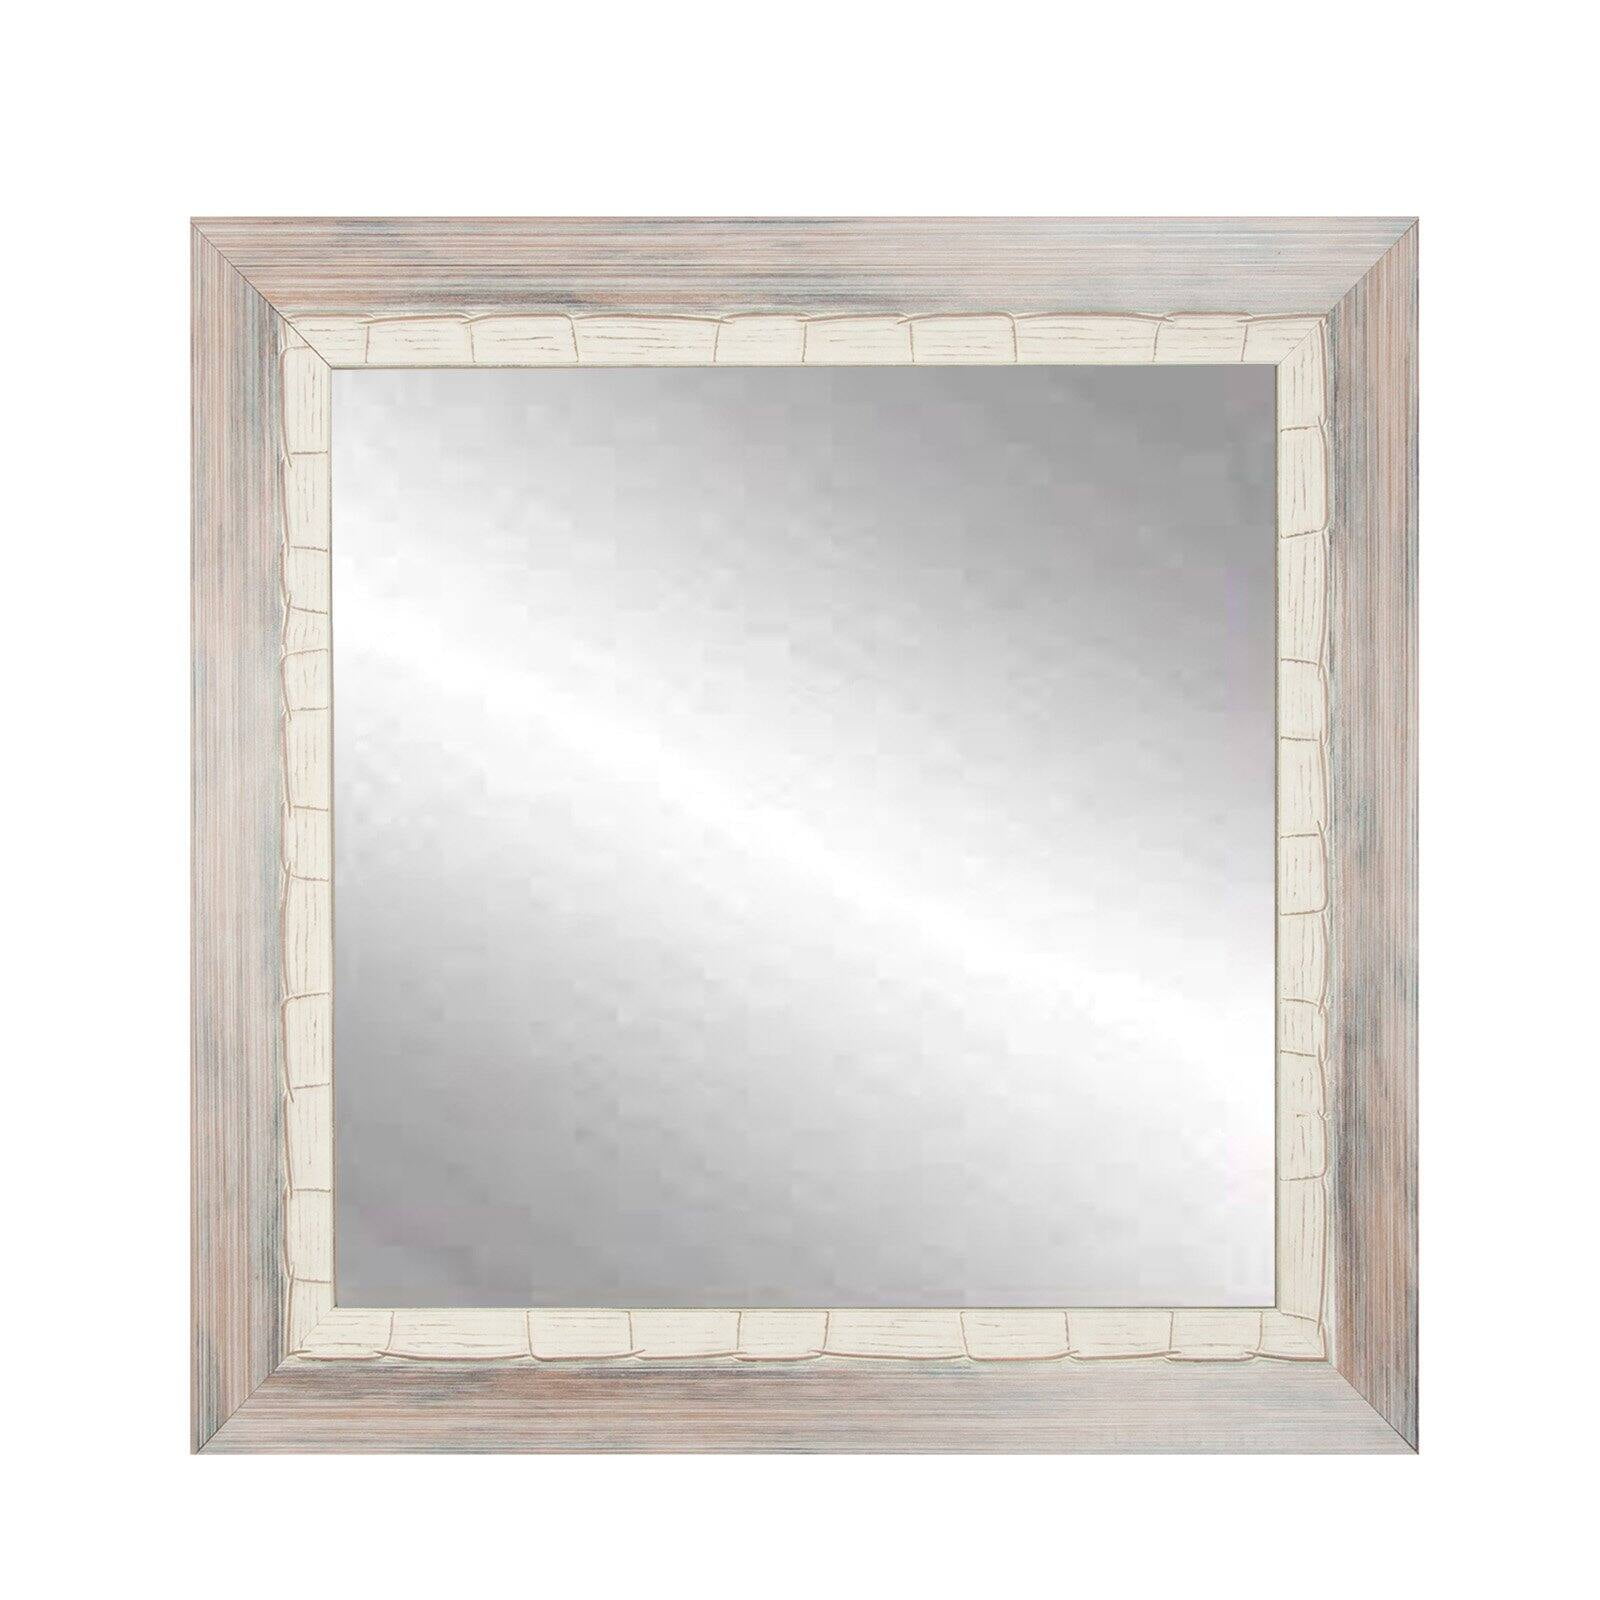 BrandtWorks Weathered Beach Square Wall Mirror